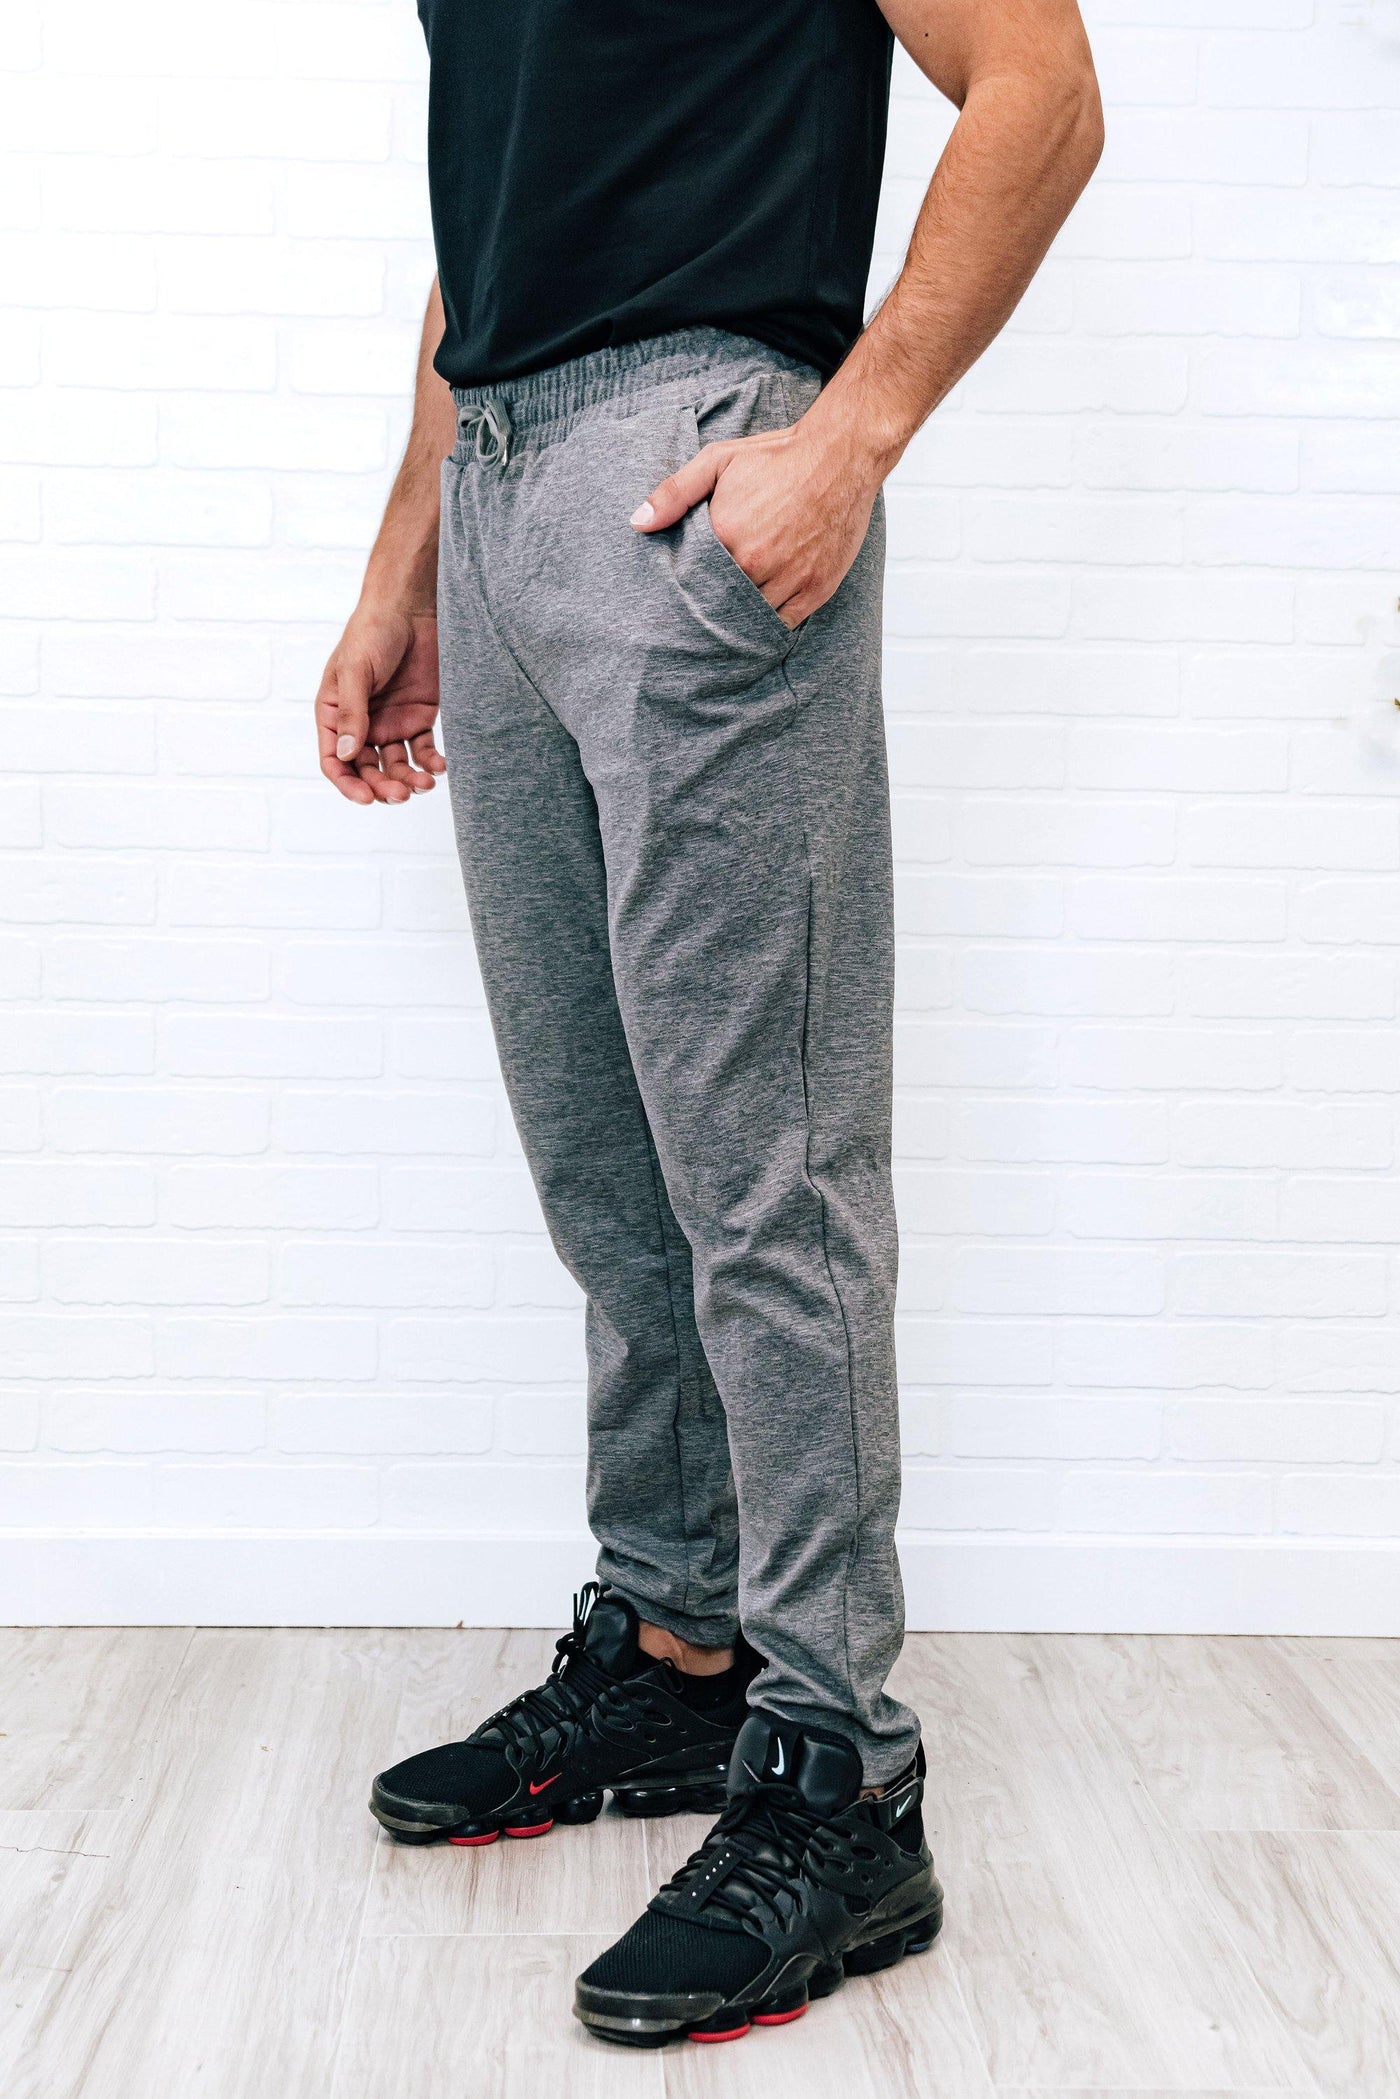 Super Fly Joggers - Identity Boutique